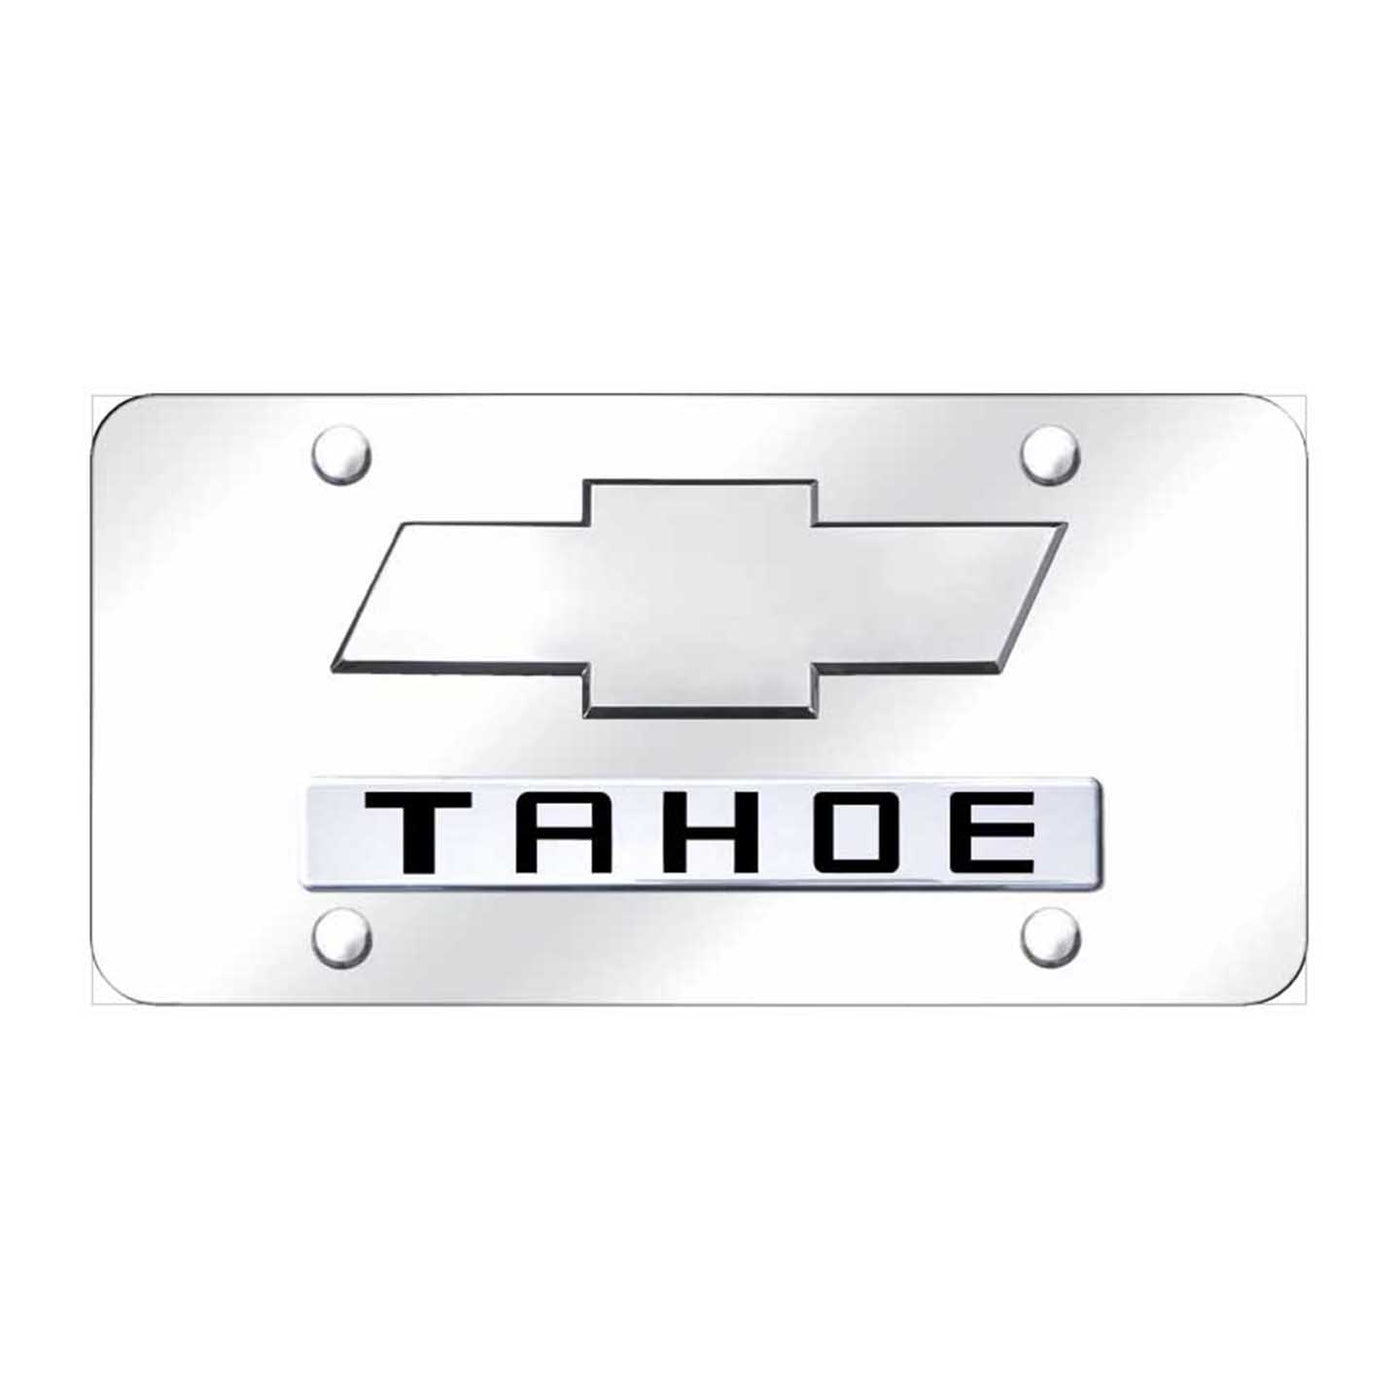 Dual Tahoe (New) License Plate - Chrome on Mirrored